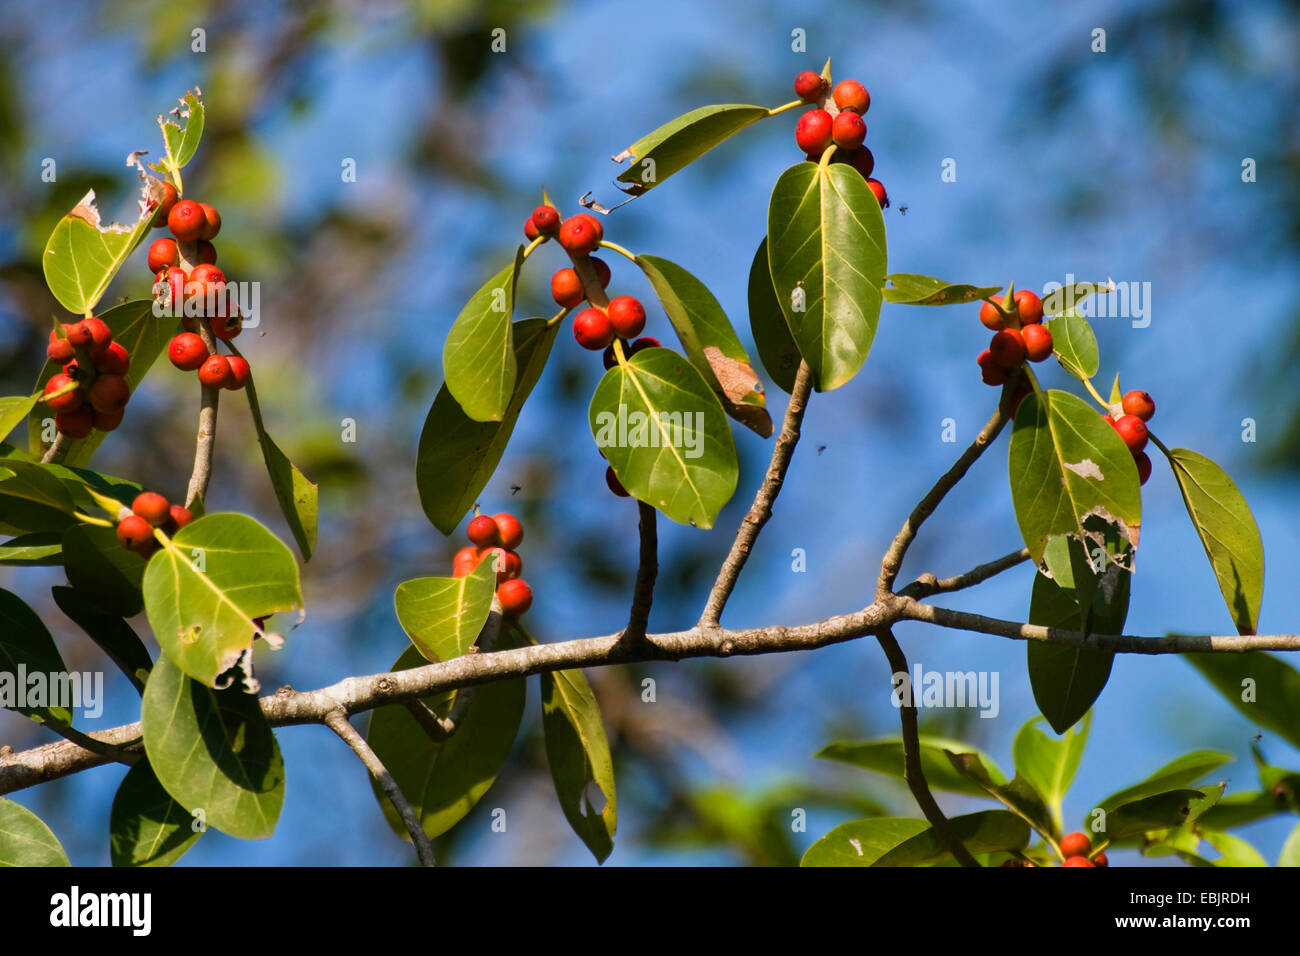 Banyan (Ficus benghalensis), branch with fruits, India Stock Photo